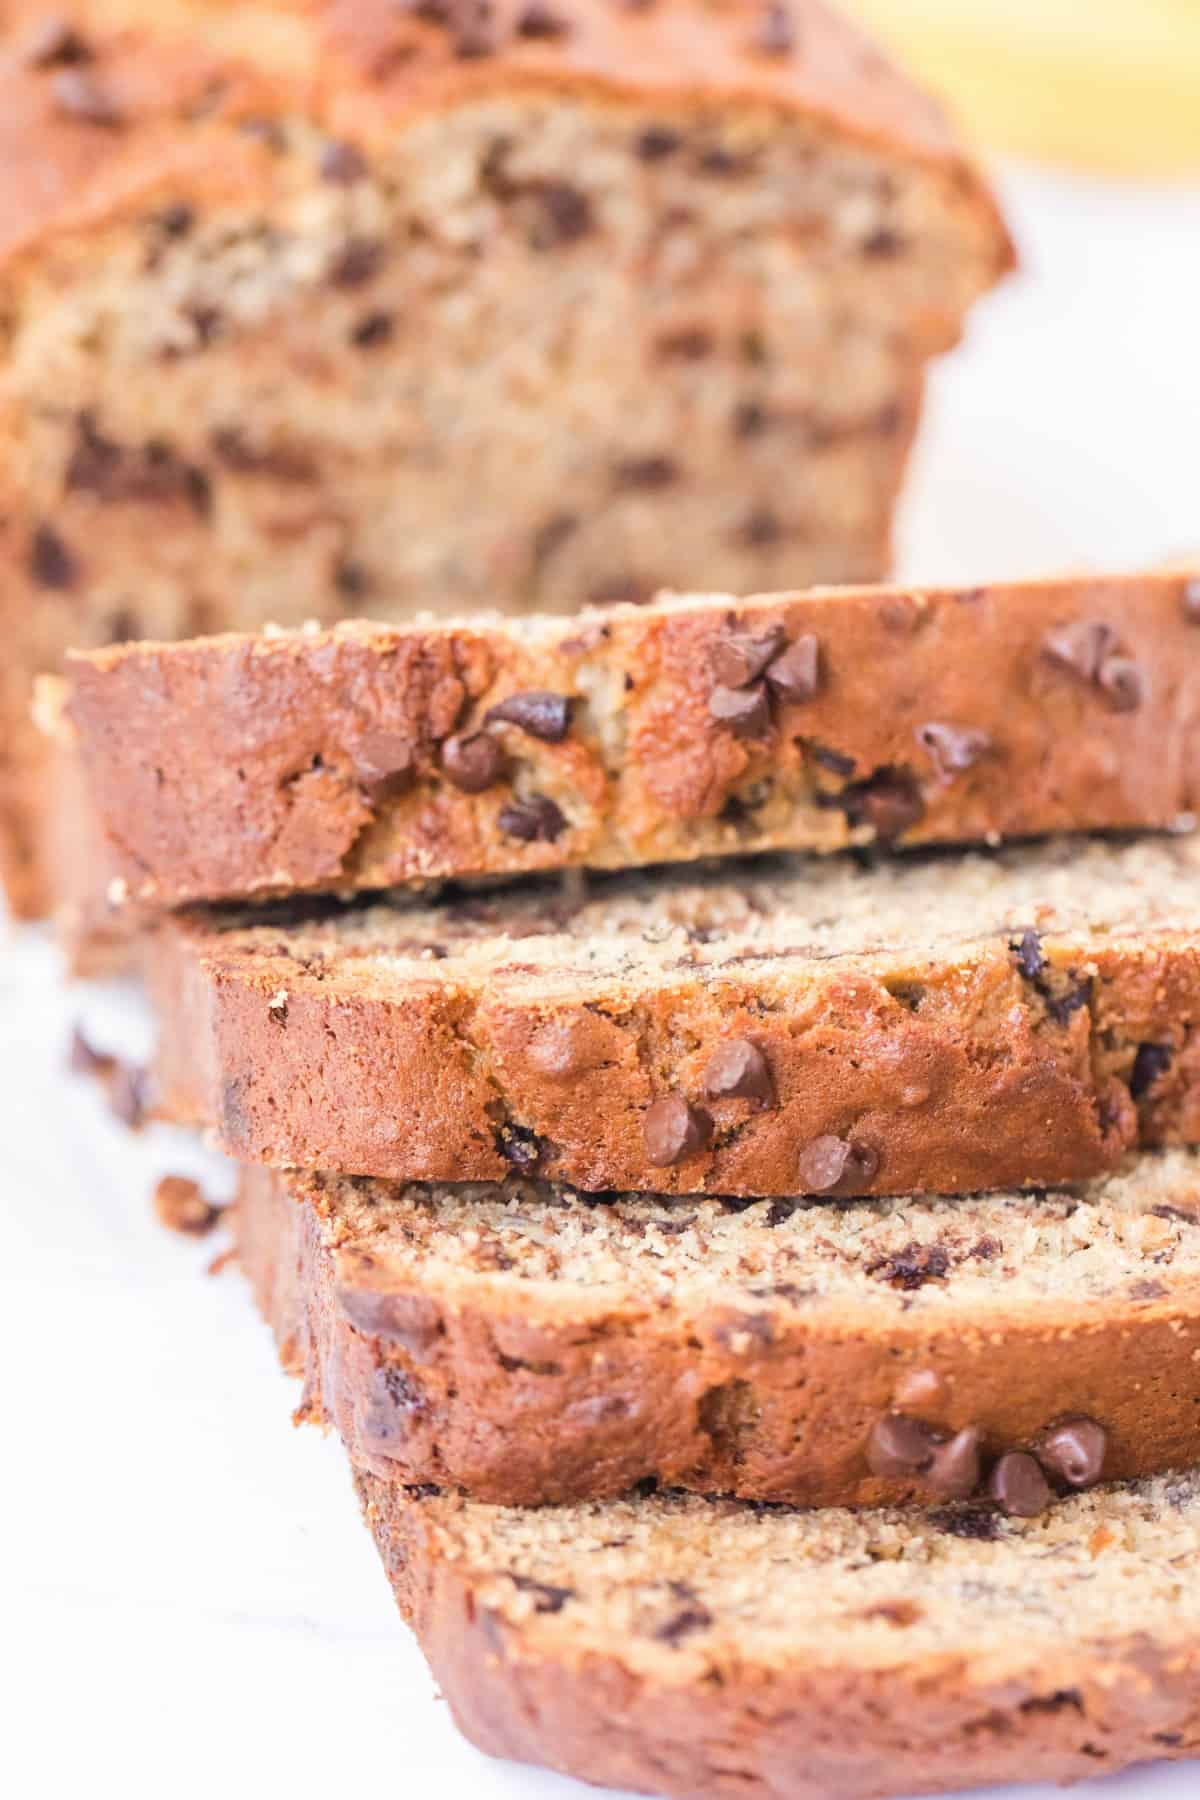 Thick slices of chocolate chip banana bread on a white counter.